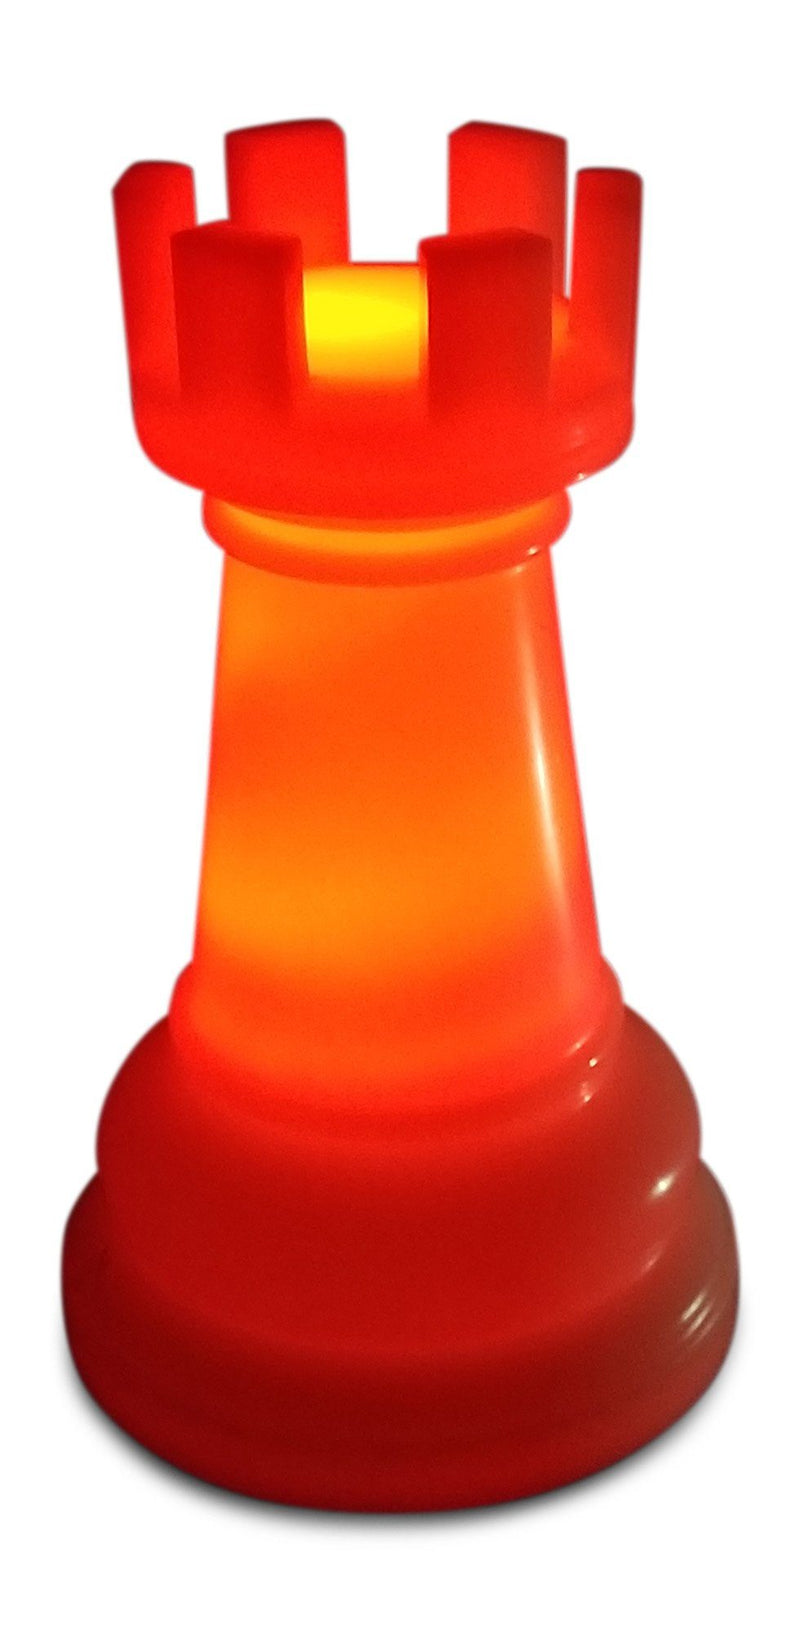 MegaChess 21 Inch Premium Plastic Rook Light-Up Giant Chess Piece - Red | Default Title | GiantChessUSA